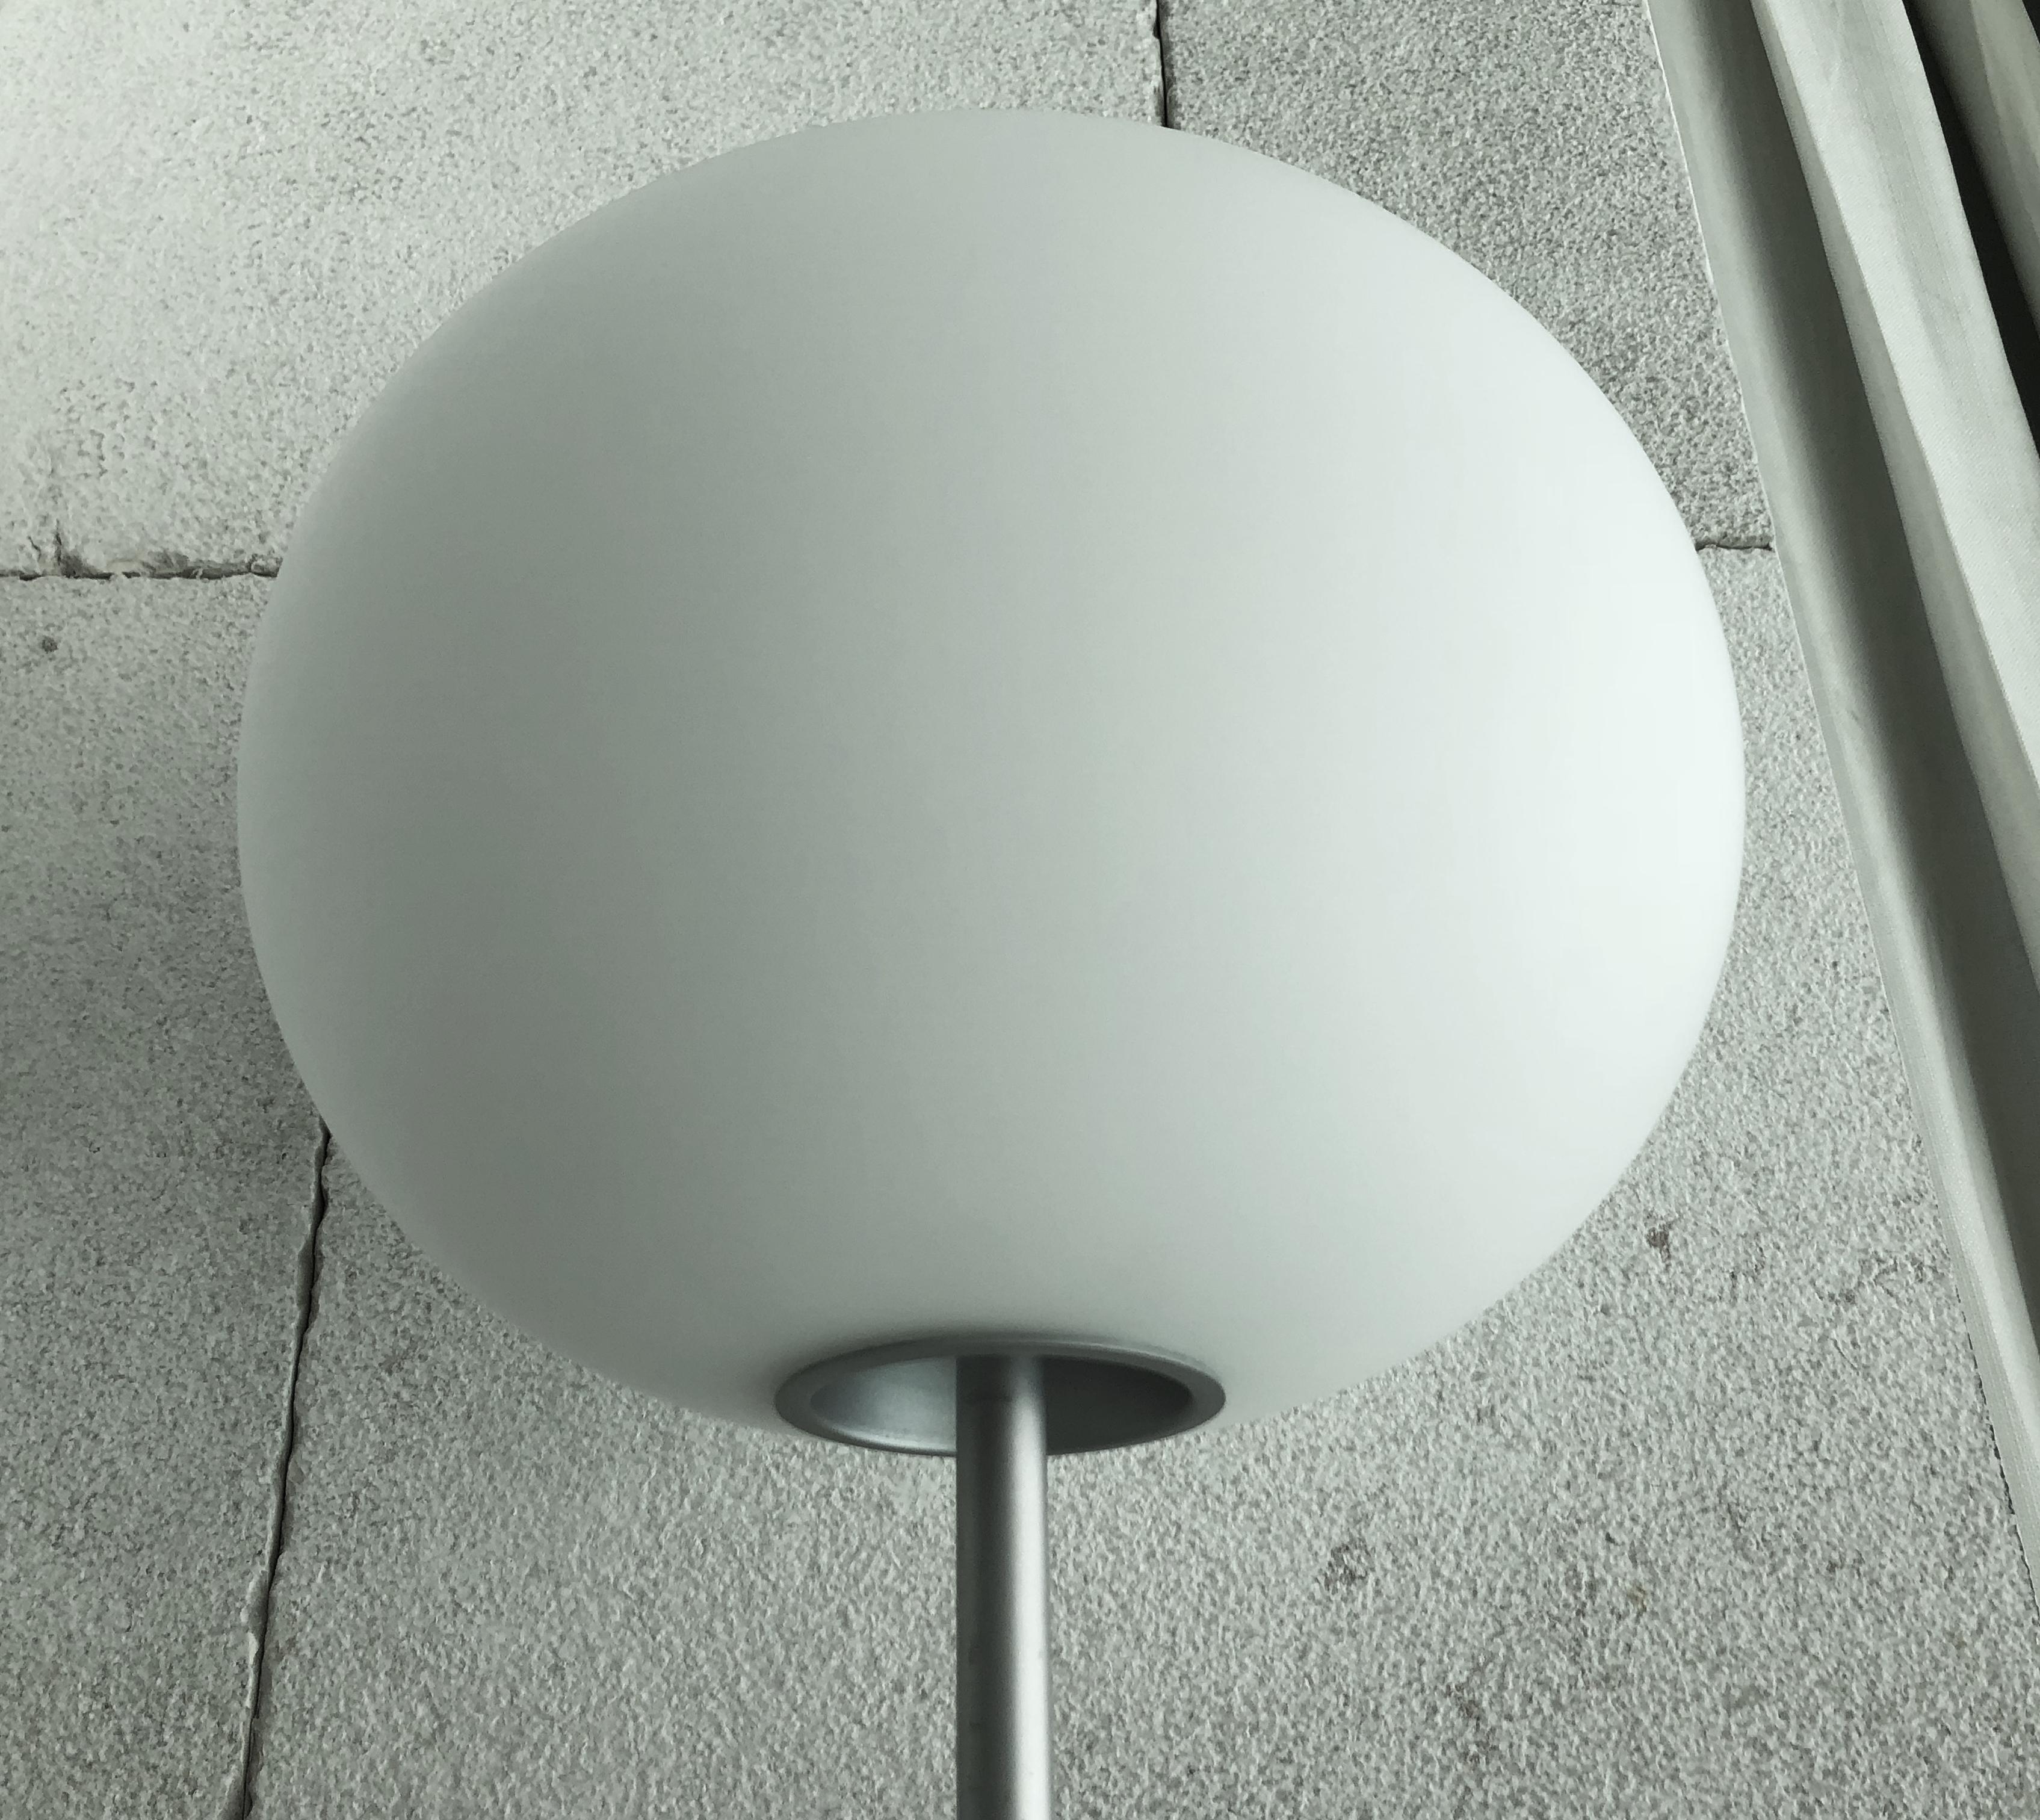 glo-ball t1 table lamp